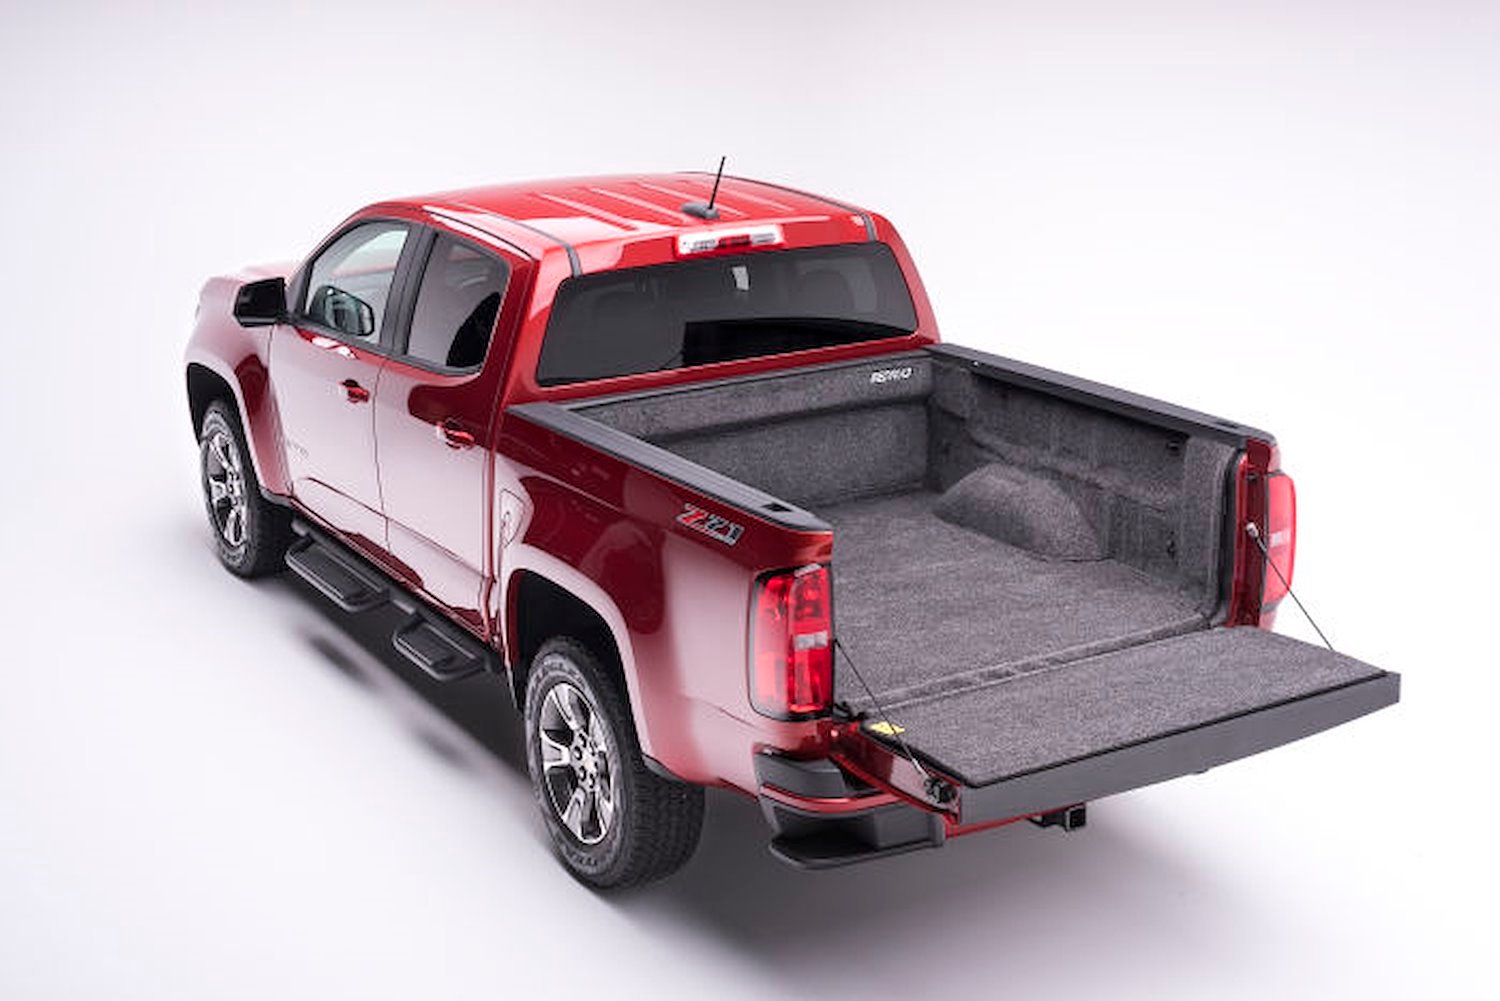 Truck Bed Liner Fits Select Chevy Colorado, GMC